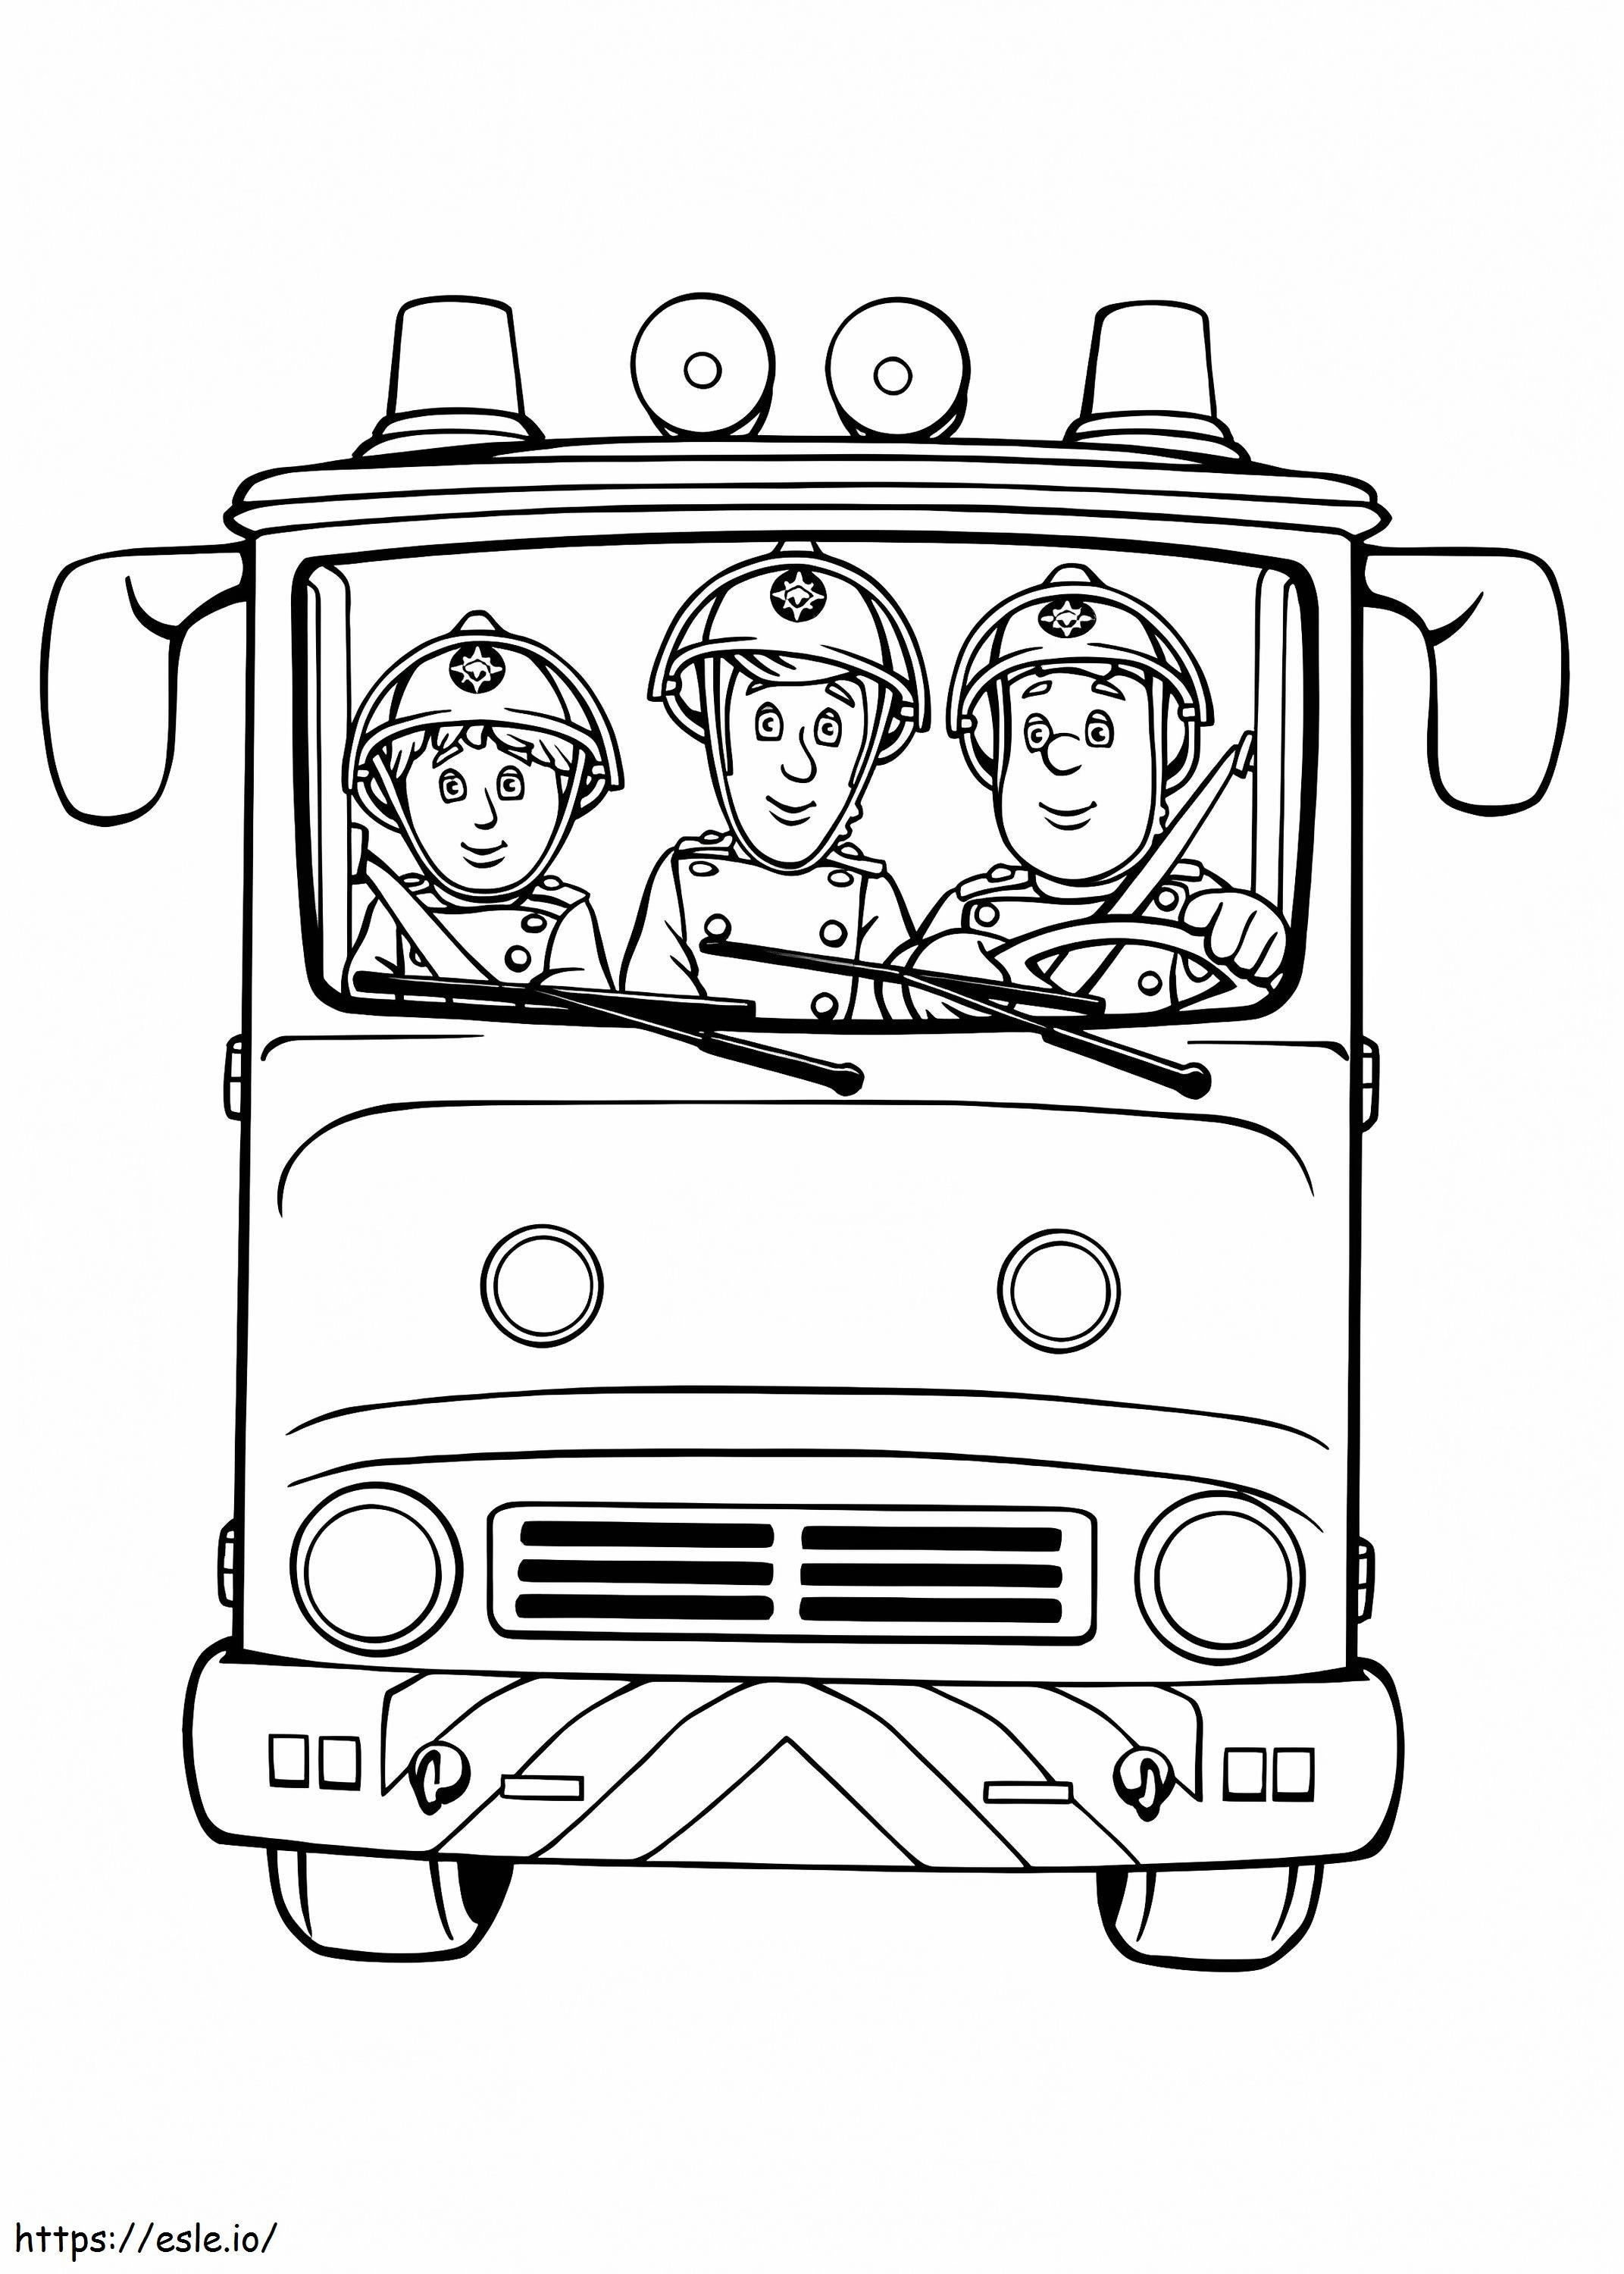 Firefighter Sam And His Teammates On A Fire Truck coloring page